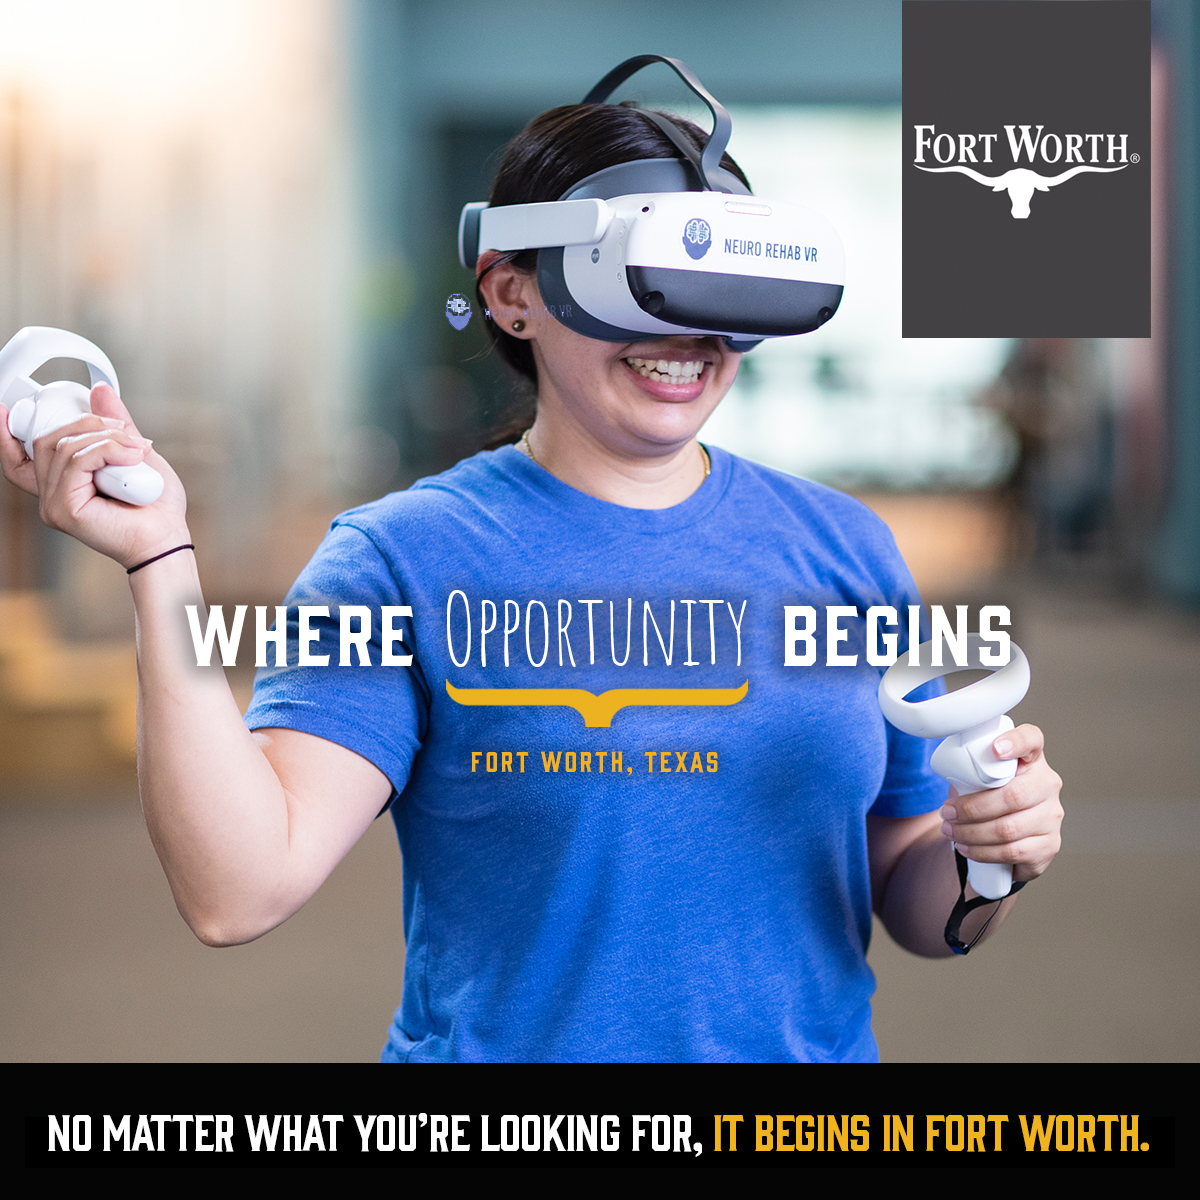 Encouraging #entrepreneurship is another part of economic development in #FortWorth! #EconDevWeek Our city's entrepreneurial support organizations do an outstanding job connecting and supporting entrepreneurs like @NeuroRehabVR at all stages of their journey. #ItBeginsInFW